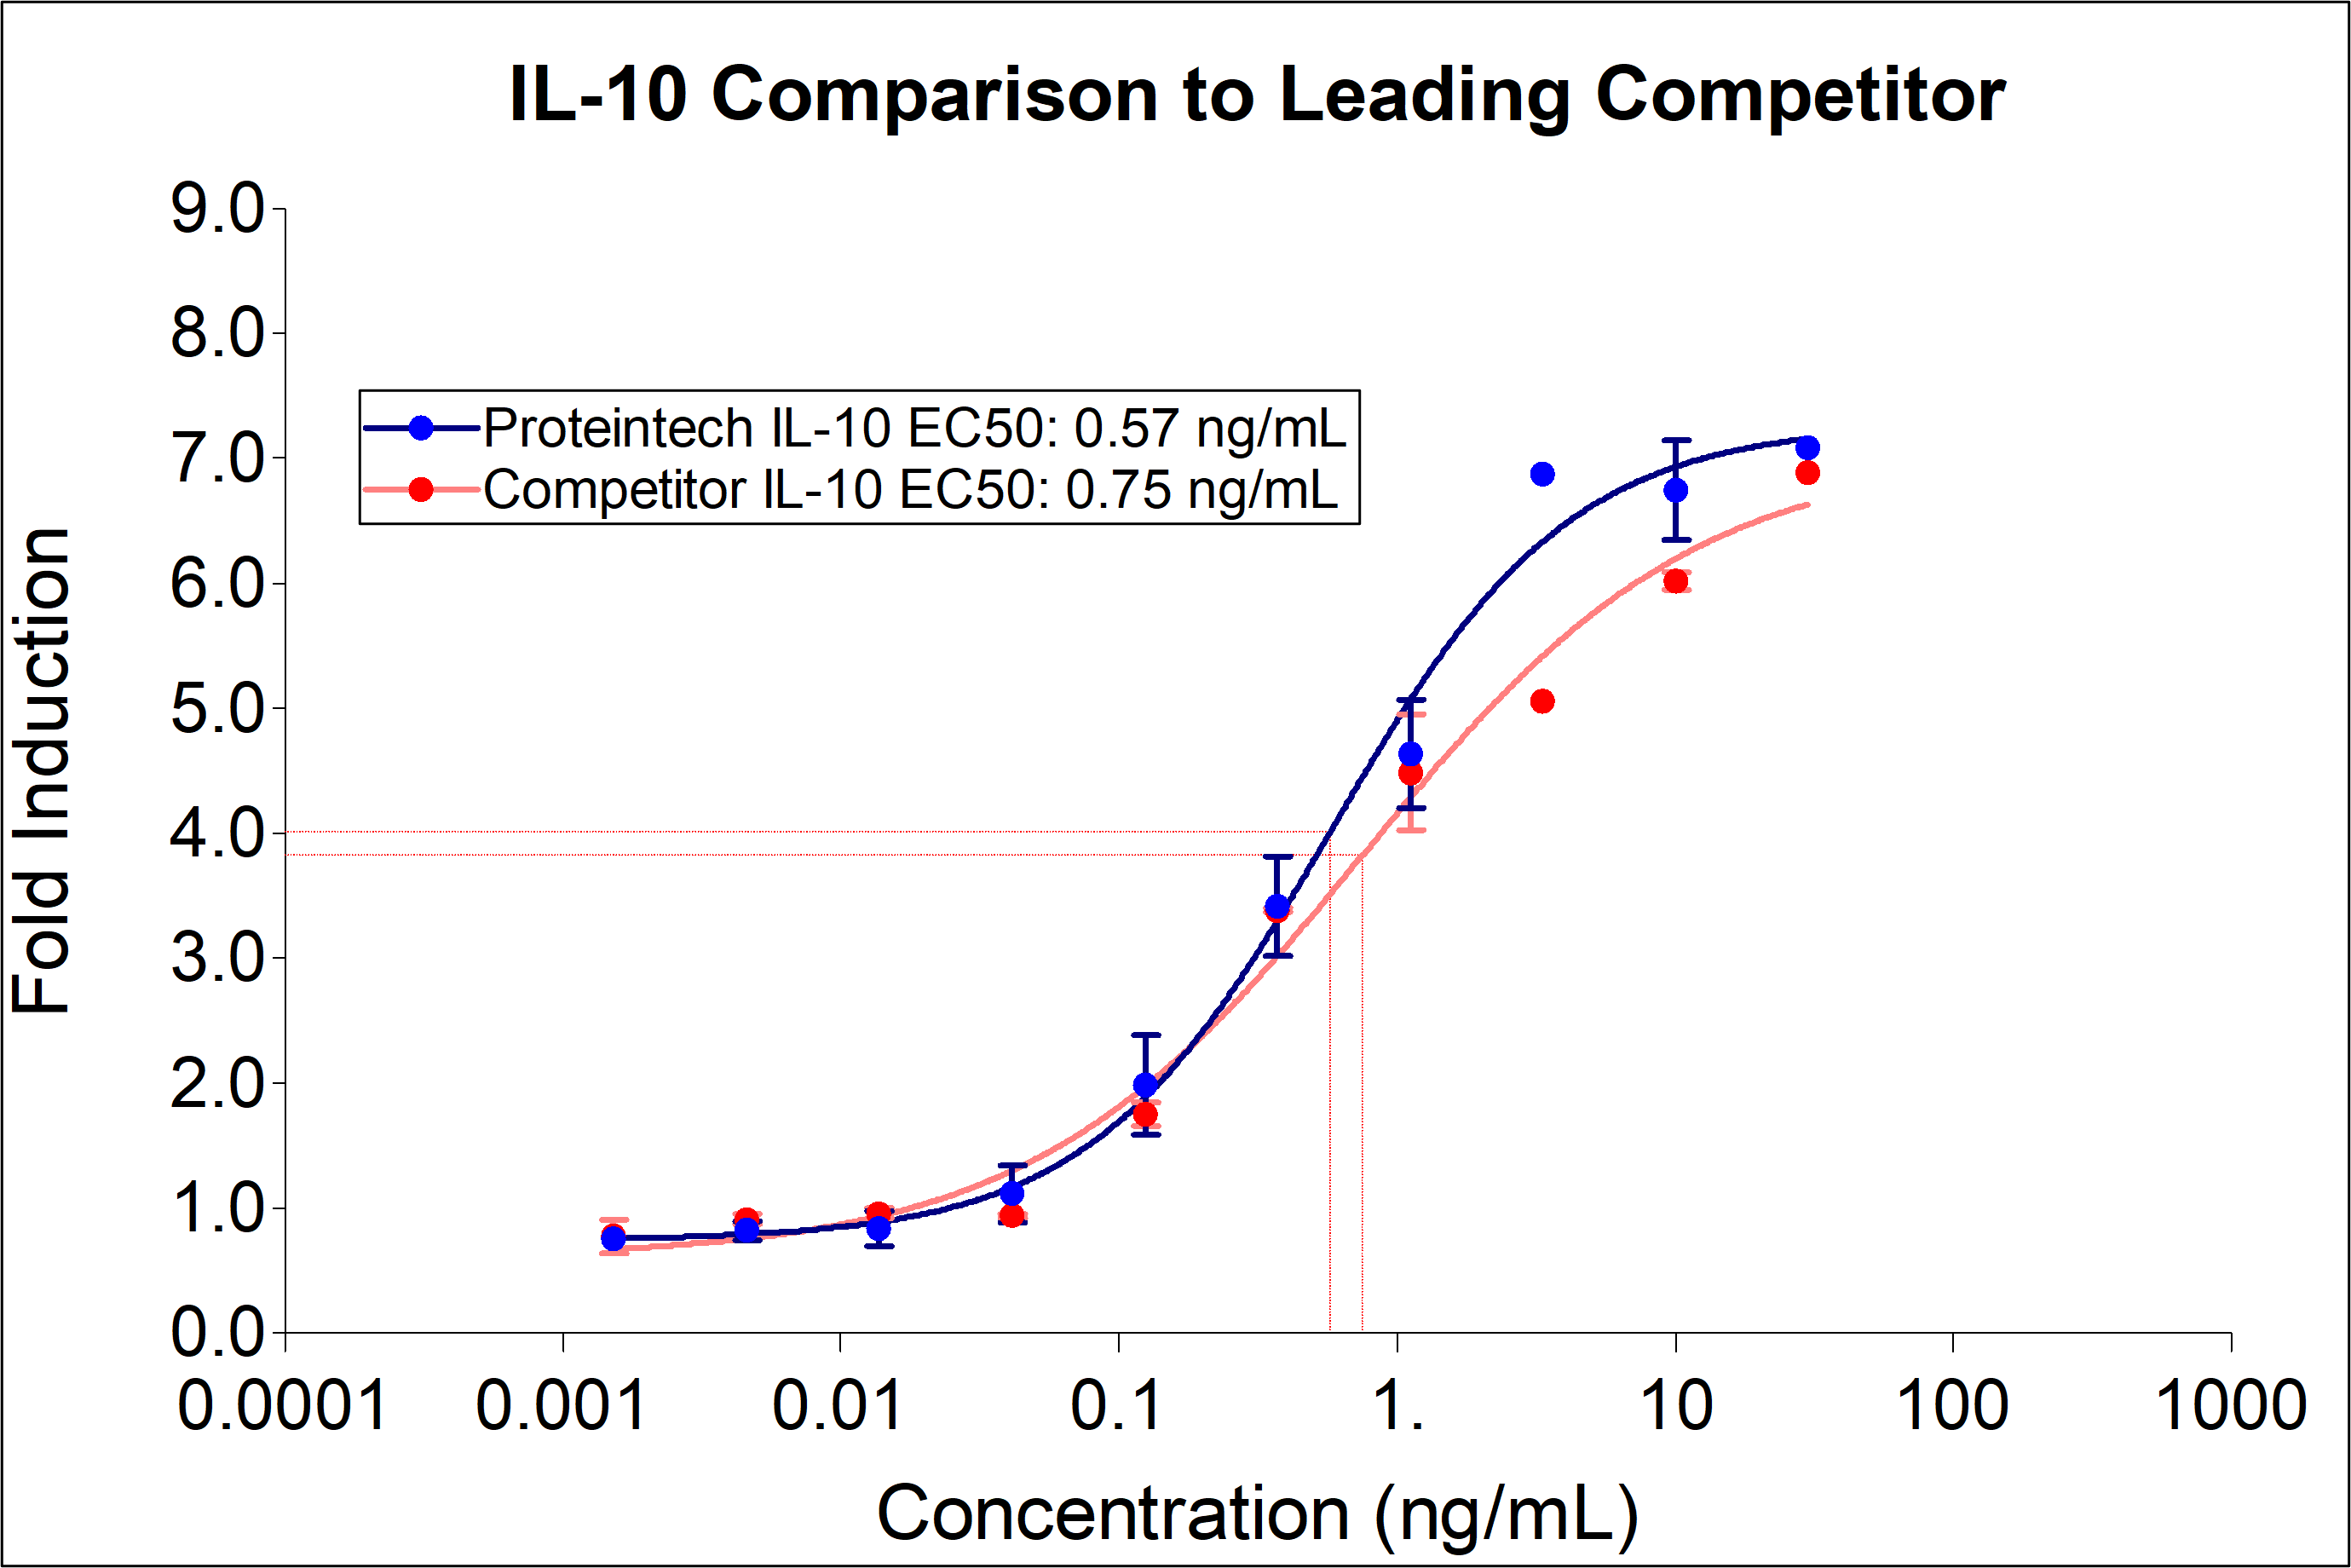 Proteintech IL-10 (HZ-1145) demonstrates equivalent induction of proliferation and EC50 to leading competitors. IL-10 Induces dose-dependent proliferation of the MC/9 (mouse mast cell) cell line. Cell number was quantitatively assessed by PrestoBlue® cell viability reagent. MC/9 cells were treated with increasing concentration of recombinant IL-10 for 48 hours. The EC50 was determined using a 4-parameter non-linear regression model. The EC50 range is 0.18-2.0 ng/mL.